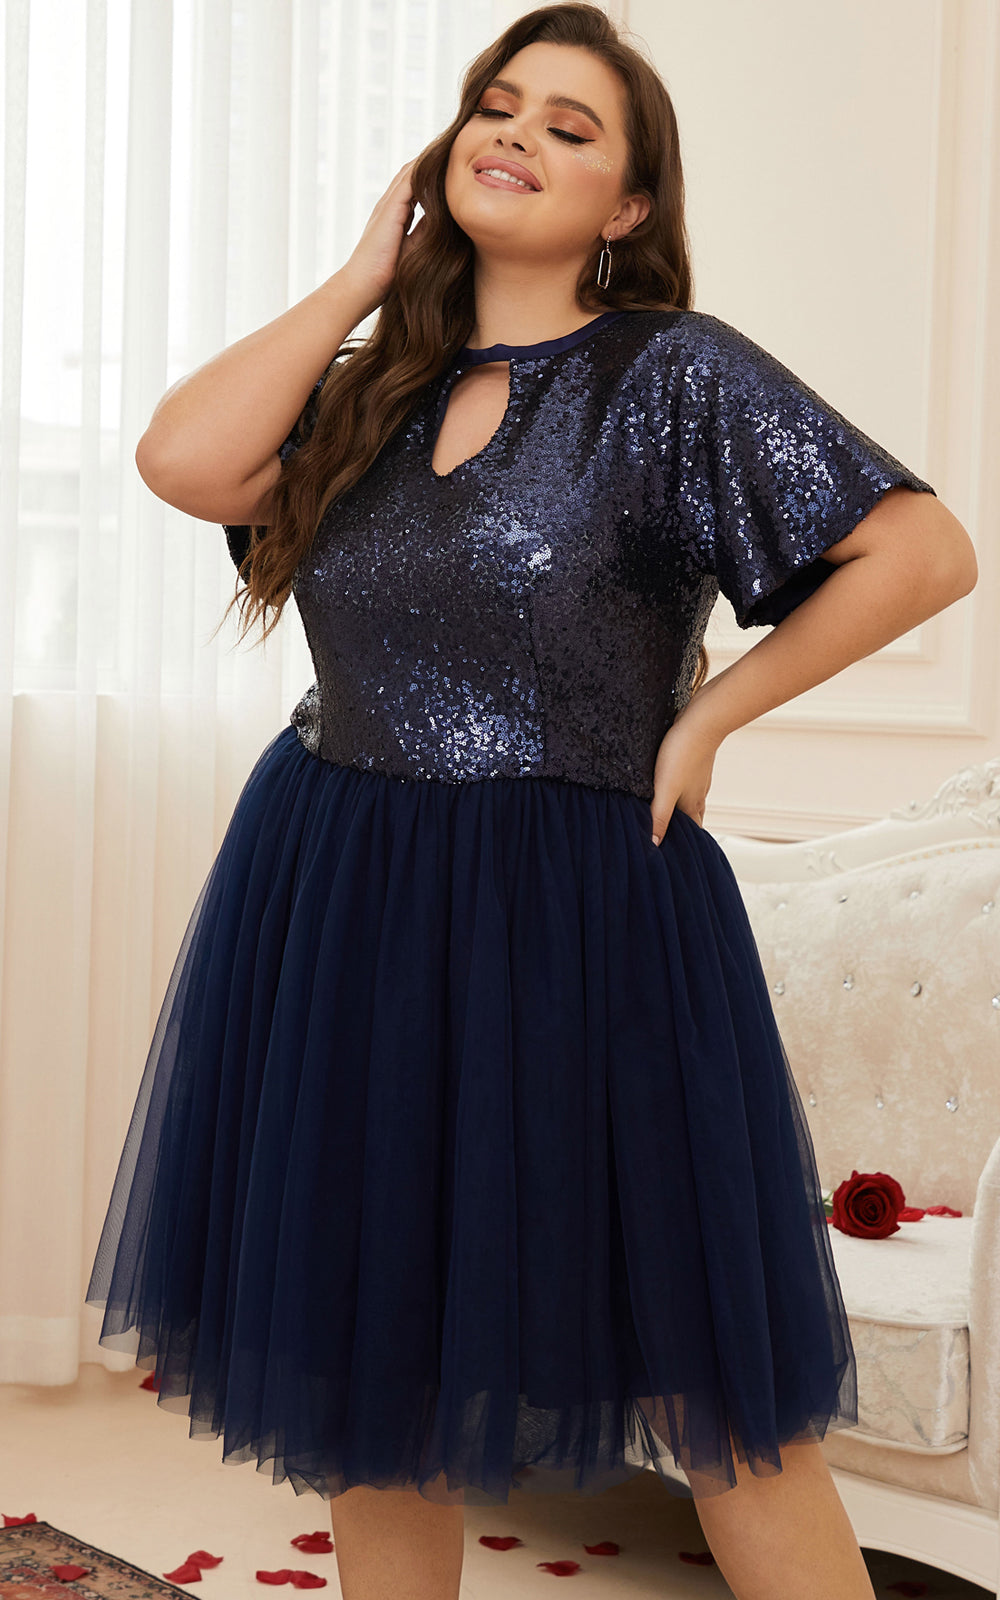 Plus Size Fashion Women Short Cocktail Party Dresses Short Prom Gowns Sequins Tulle Glitter Sexy Homecoming Knee Length for Wedding Guest, Navy Blue, 0XL